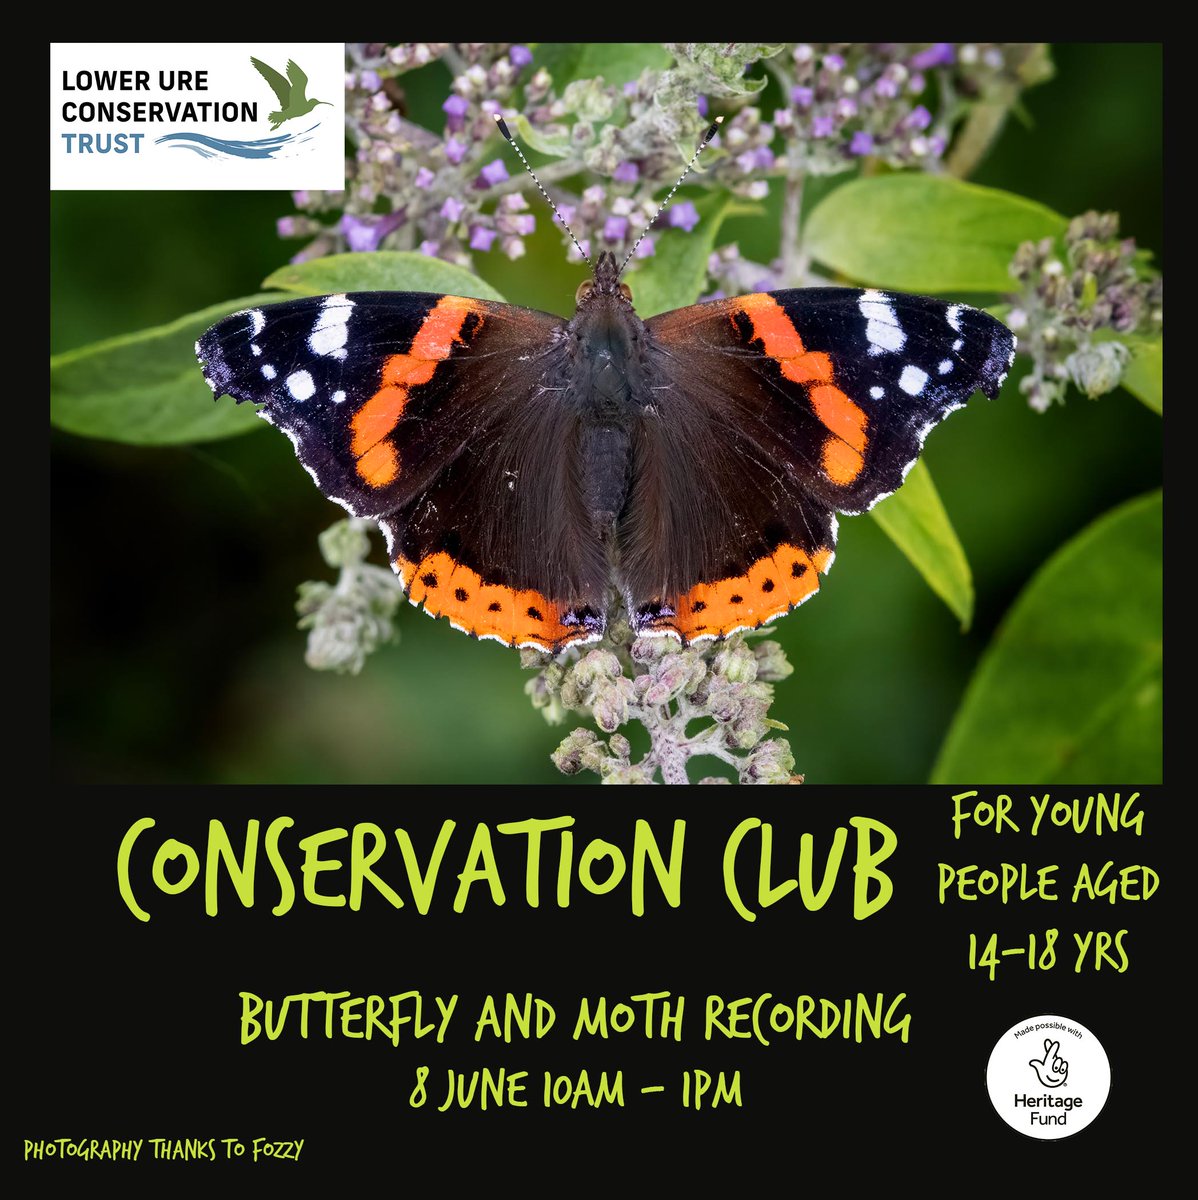 Conservation club for young people aged 14-18 years 8 June, 10am - 1pm Come and find out about how we record butterflies and moths on the reserve! For more information, visit: luct.org.uk/events-1/2024/… @HeritageFundNOR @HeritageFundUK @ynuorg